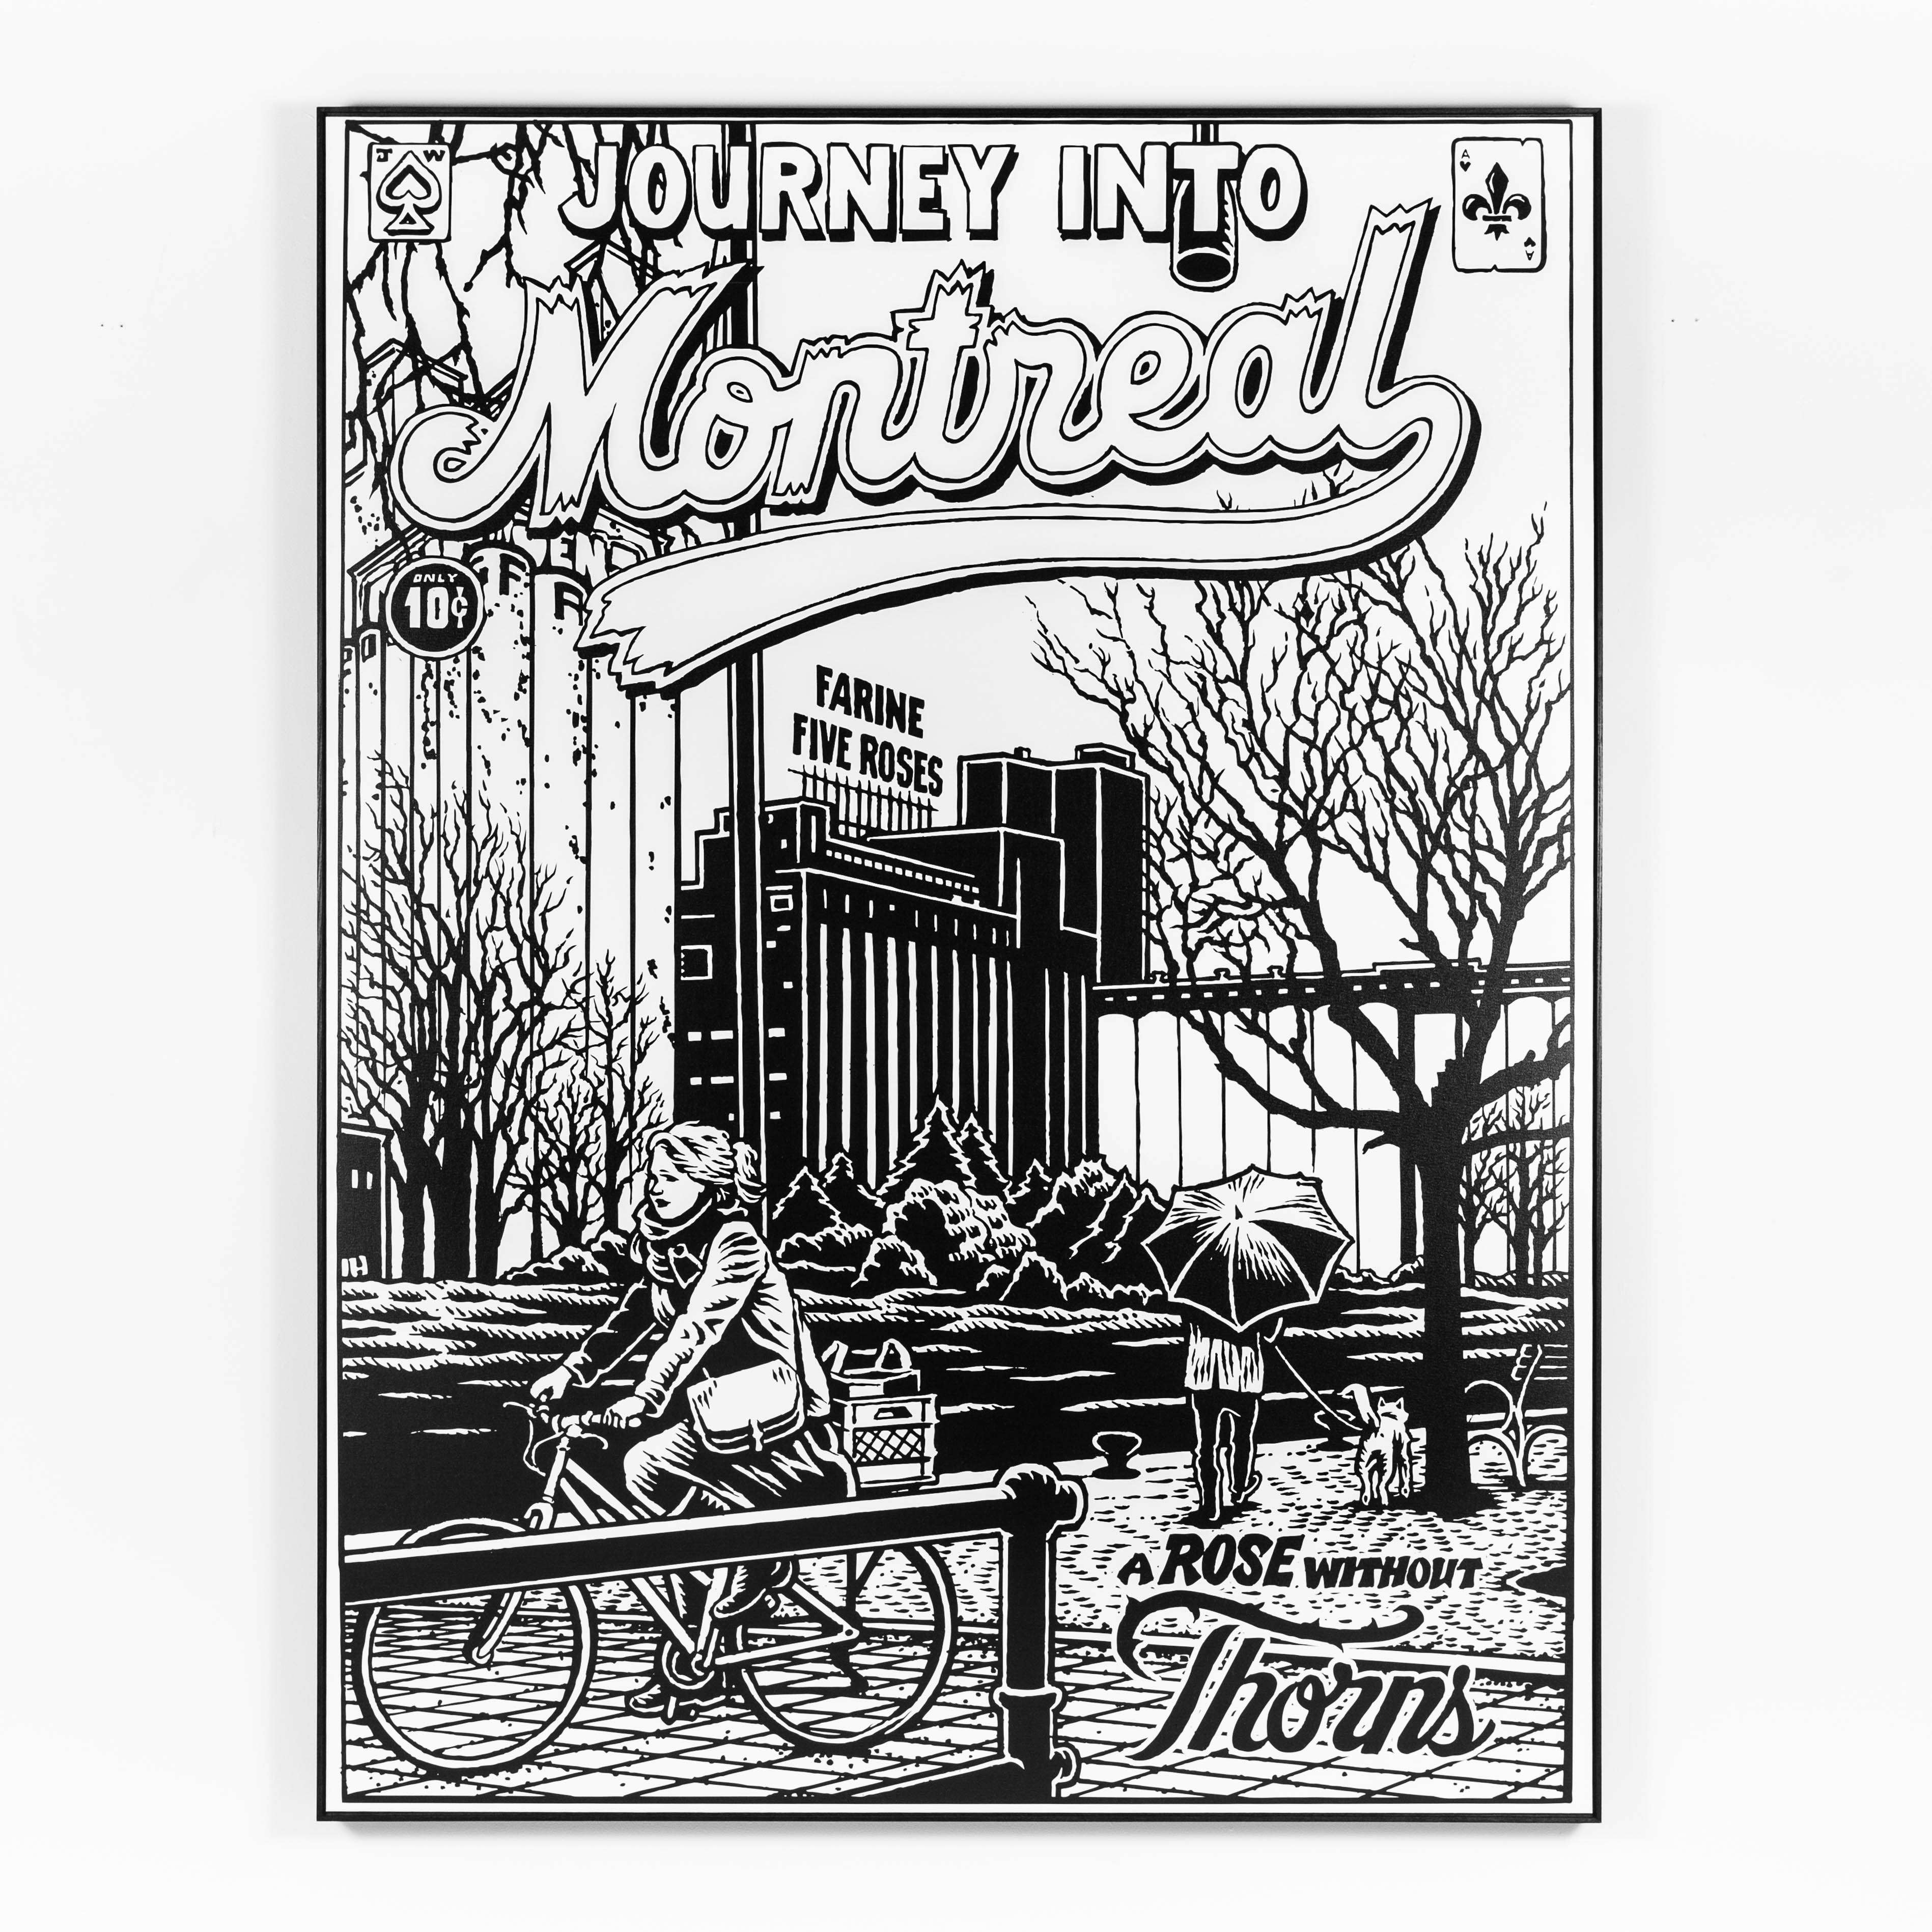 Jason Wasserman Journey Into Montreal - Farine Five Roses, sur Toile - Station 16 Editions